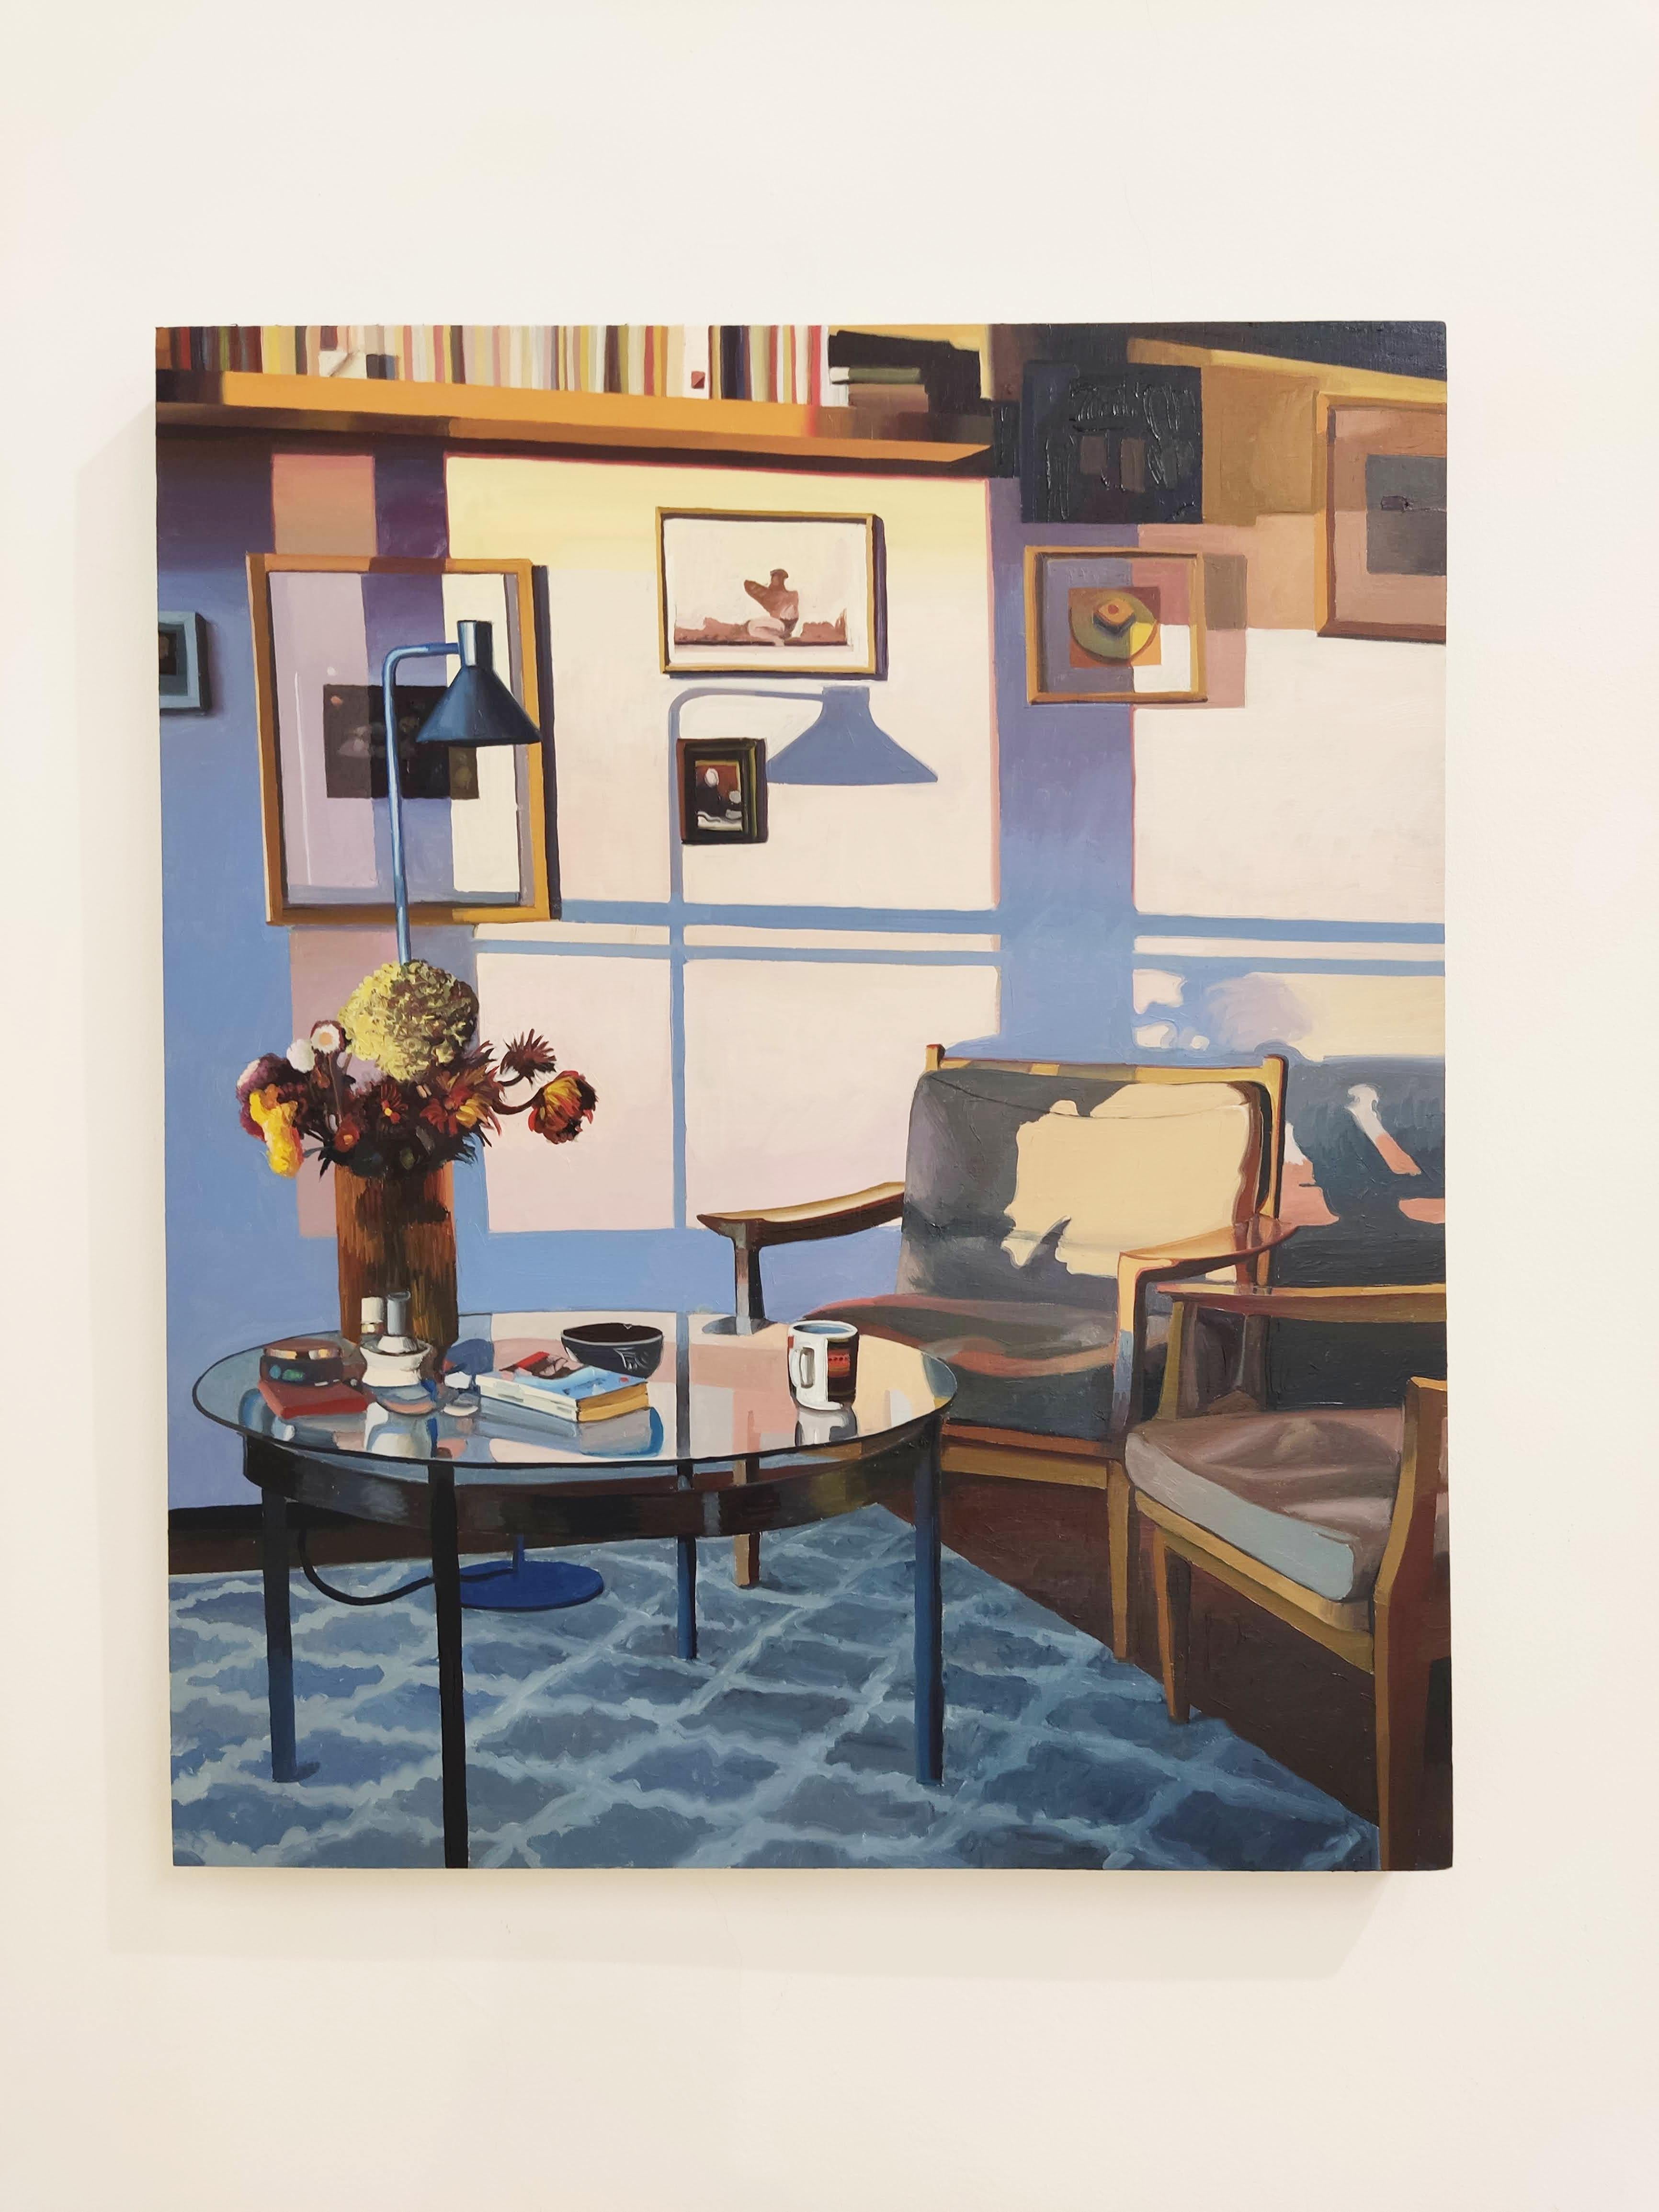 Oil painting on Coated Wood - Contemporary Interior painting
Work Title : The living room in summer
Artist : Raphaël Renaud (French artist, Born in 1974, lives and works in France and Berlin (Germany).)
The work is signed, titled and dated verso.